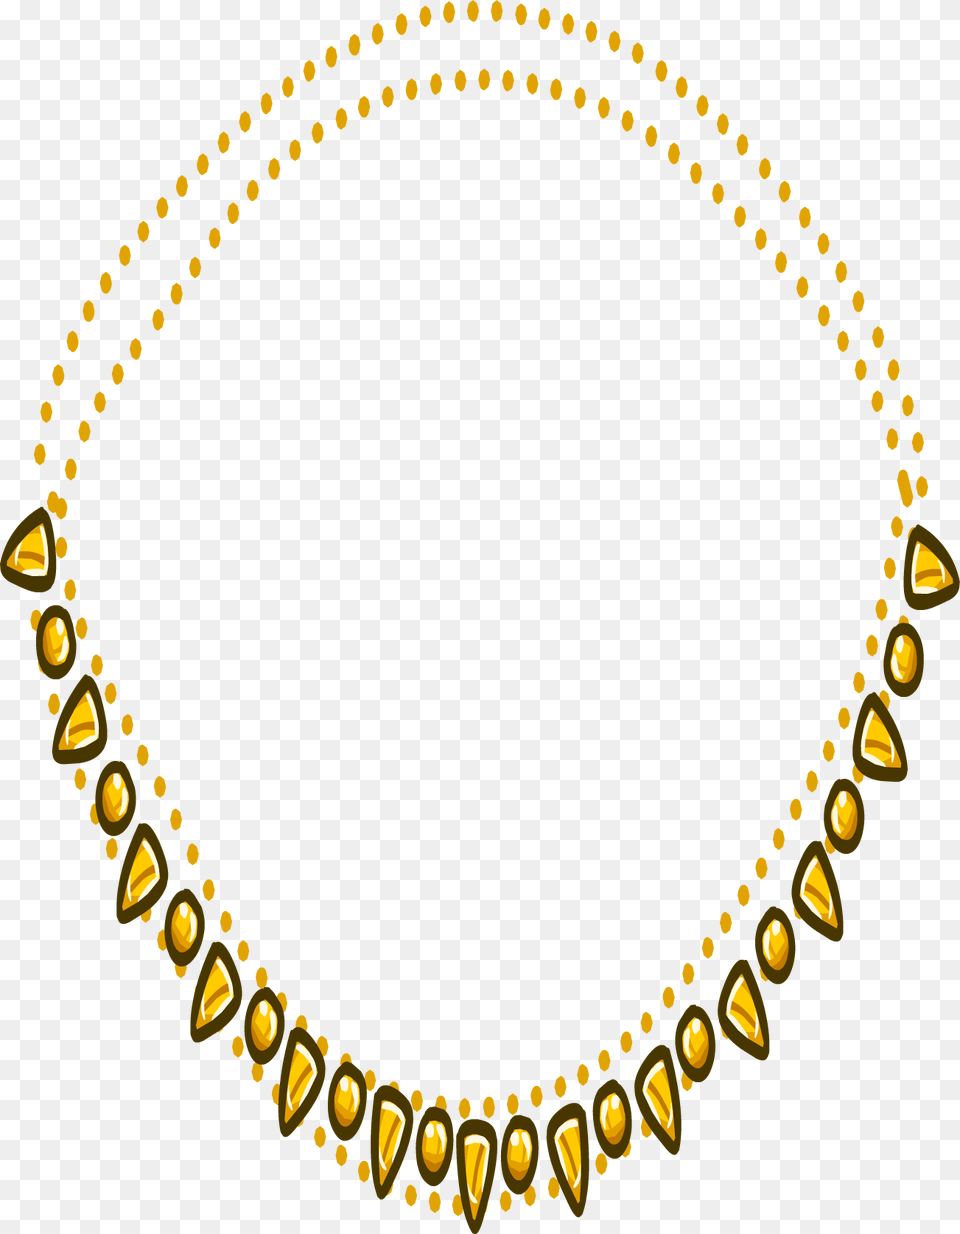 Image Gold Icon Gold Necklace Club Penguin, Accessories, Jewelry, Diamond, Gemstone Free Transparent Png